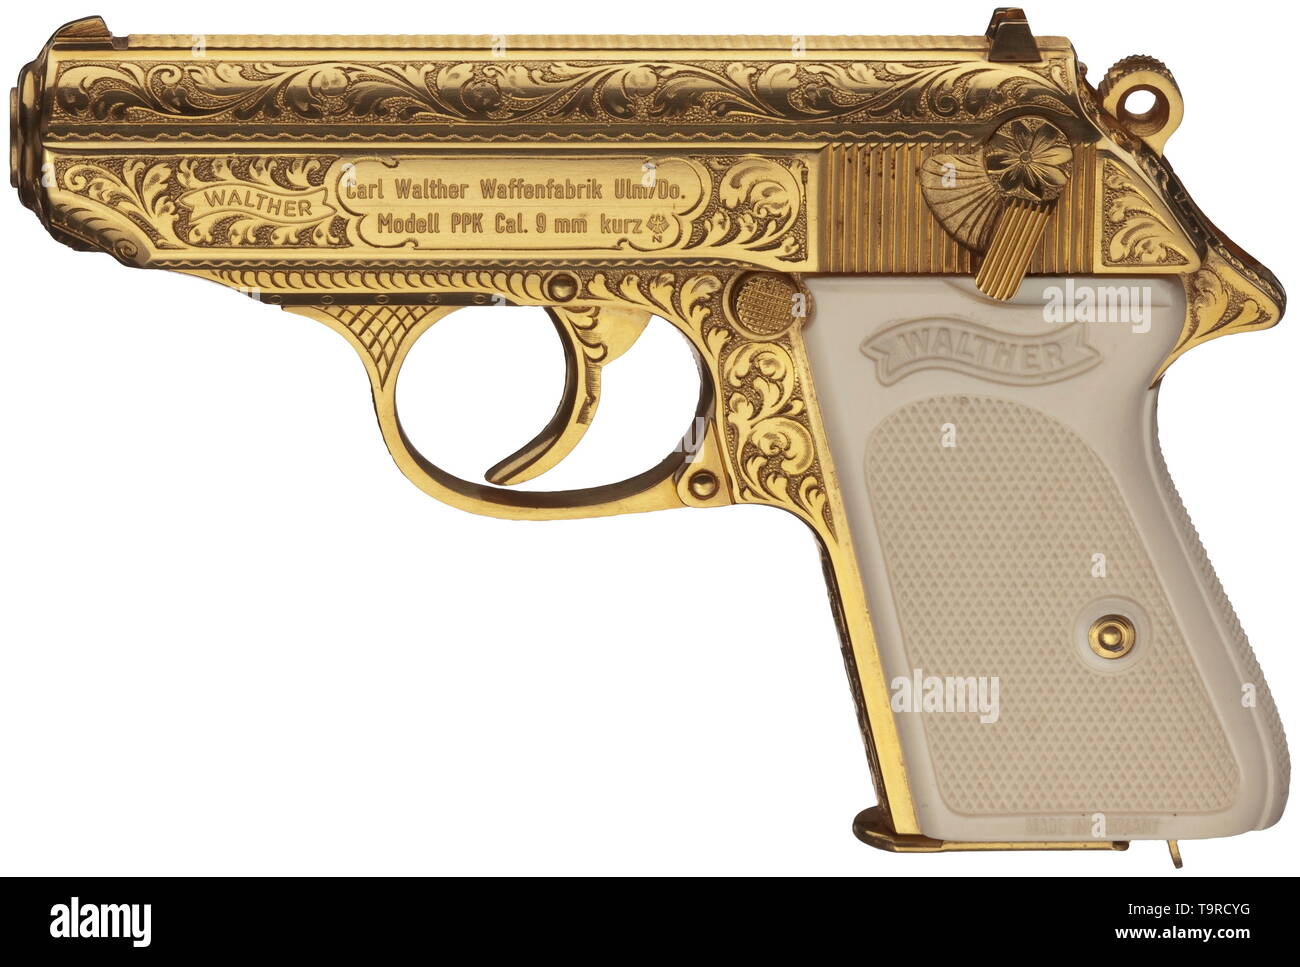 A Walther PPK Interarms, in 9 mm calibre short, engraved, gilded, in its case No. 129822A. Bright bore. Proof-marked 1969. Standard inscription. On right side of slide signed 'INTERARMS / ALEXANDRIA VIRGINIA'. All parts with lavish vine engravings, on punched surface and completely gilded. Ivorylite grip panels, the right one with American eagle. Gold-plated magazine with engraved base, likewise spare magazine and extension. Comes in dark blue luxury case, lid lined with wine-red silk and silver Walther banner, bottom with wine-red velvet and cor, Additional-Rights-Clearance-Info-Not-Available Stock Photo